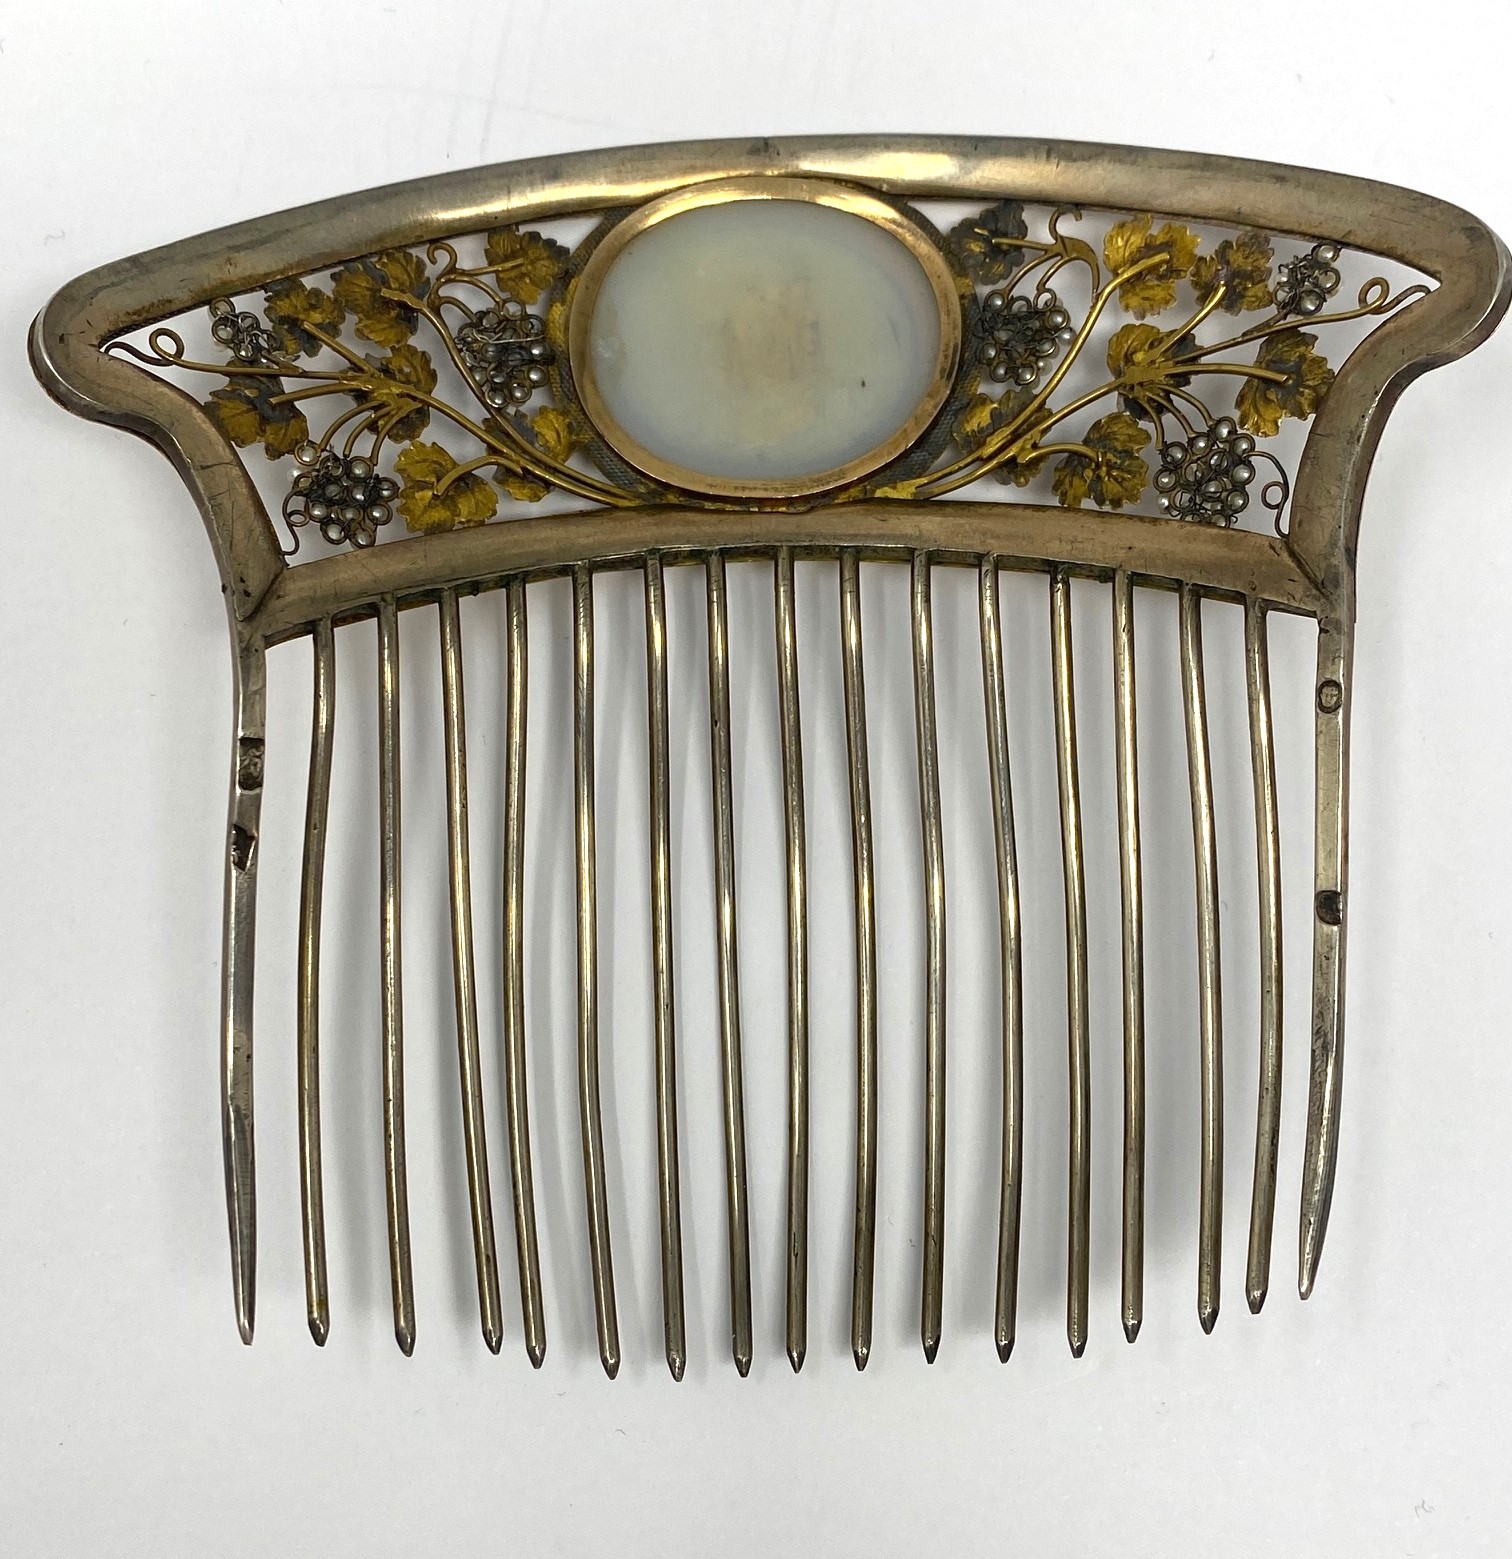 A FRENCH SILVER, GOLD AND MICROMOSAIC HAIR COMB, PARIS, 1798-1809 - Image 3 of 8